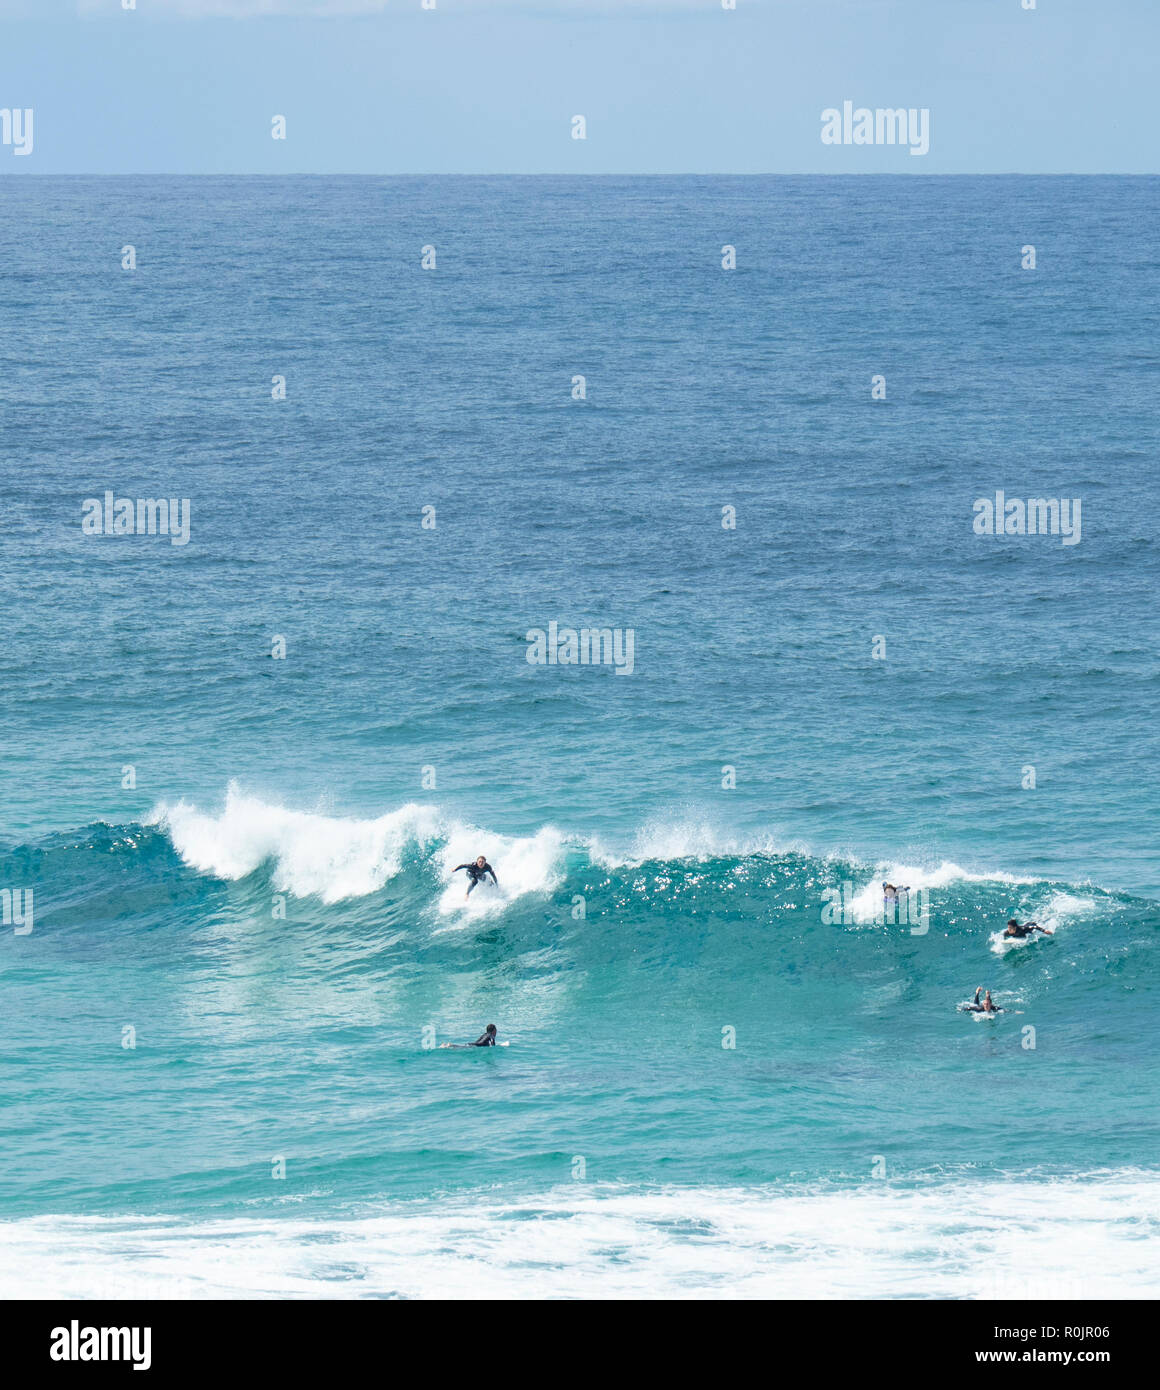 Surfers catching a wave at Bronte Beach Sydney NSW Australia. Stock Photo